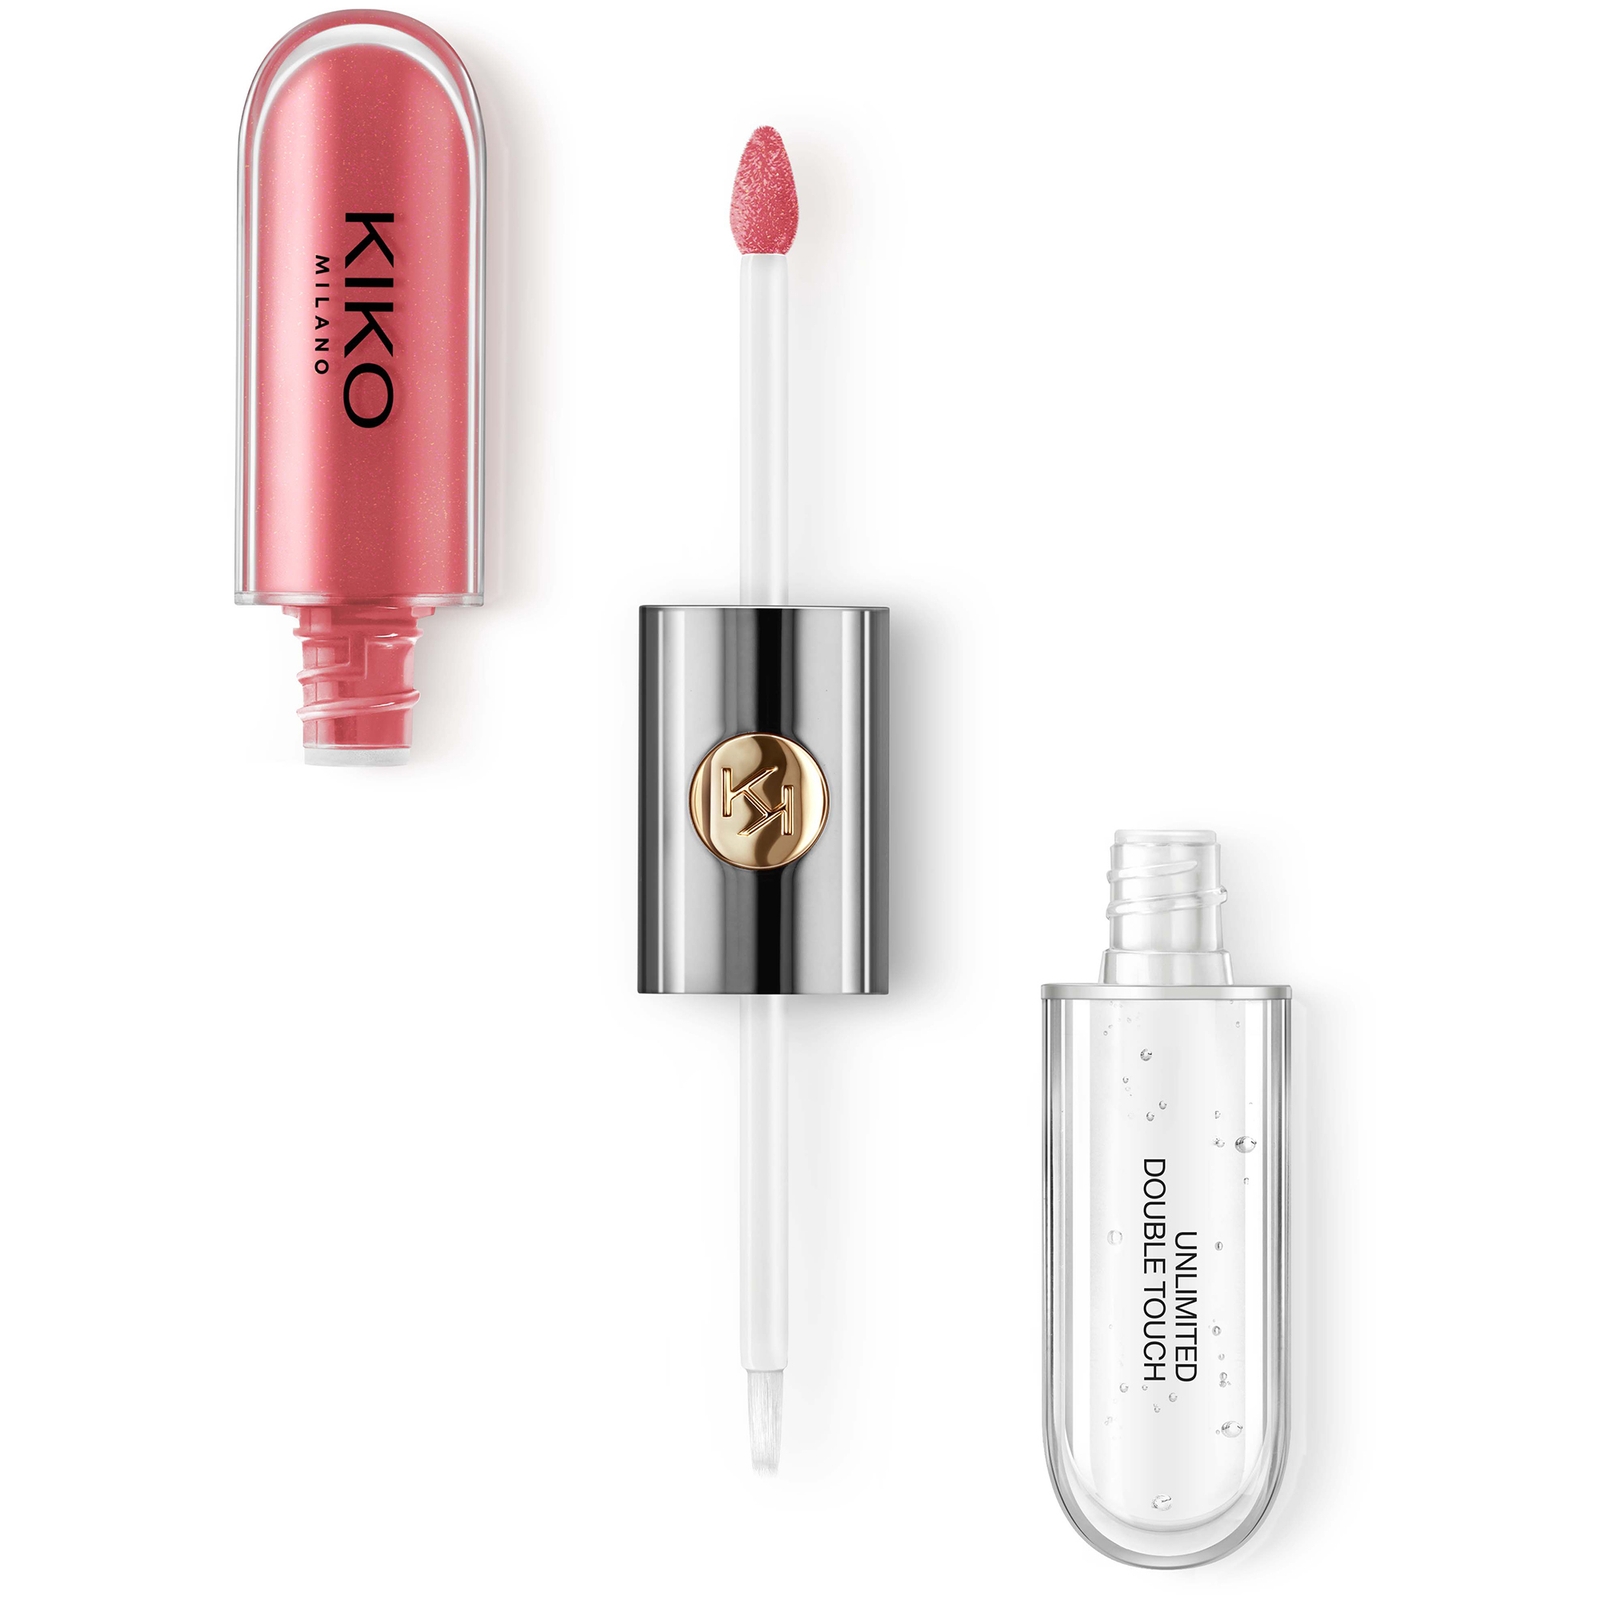 KIKO Milano Unlimited Double Touch 6ml (Various Shades) - 110 Spicy Rose